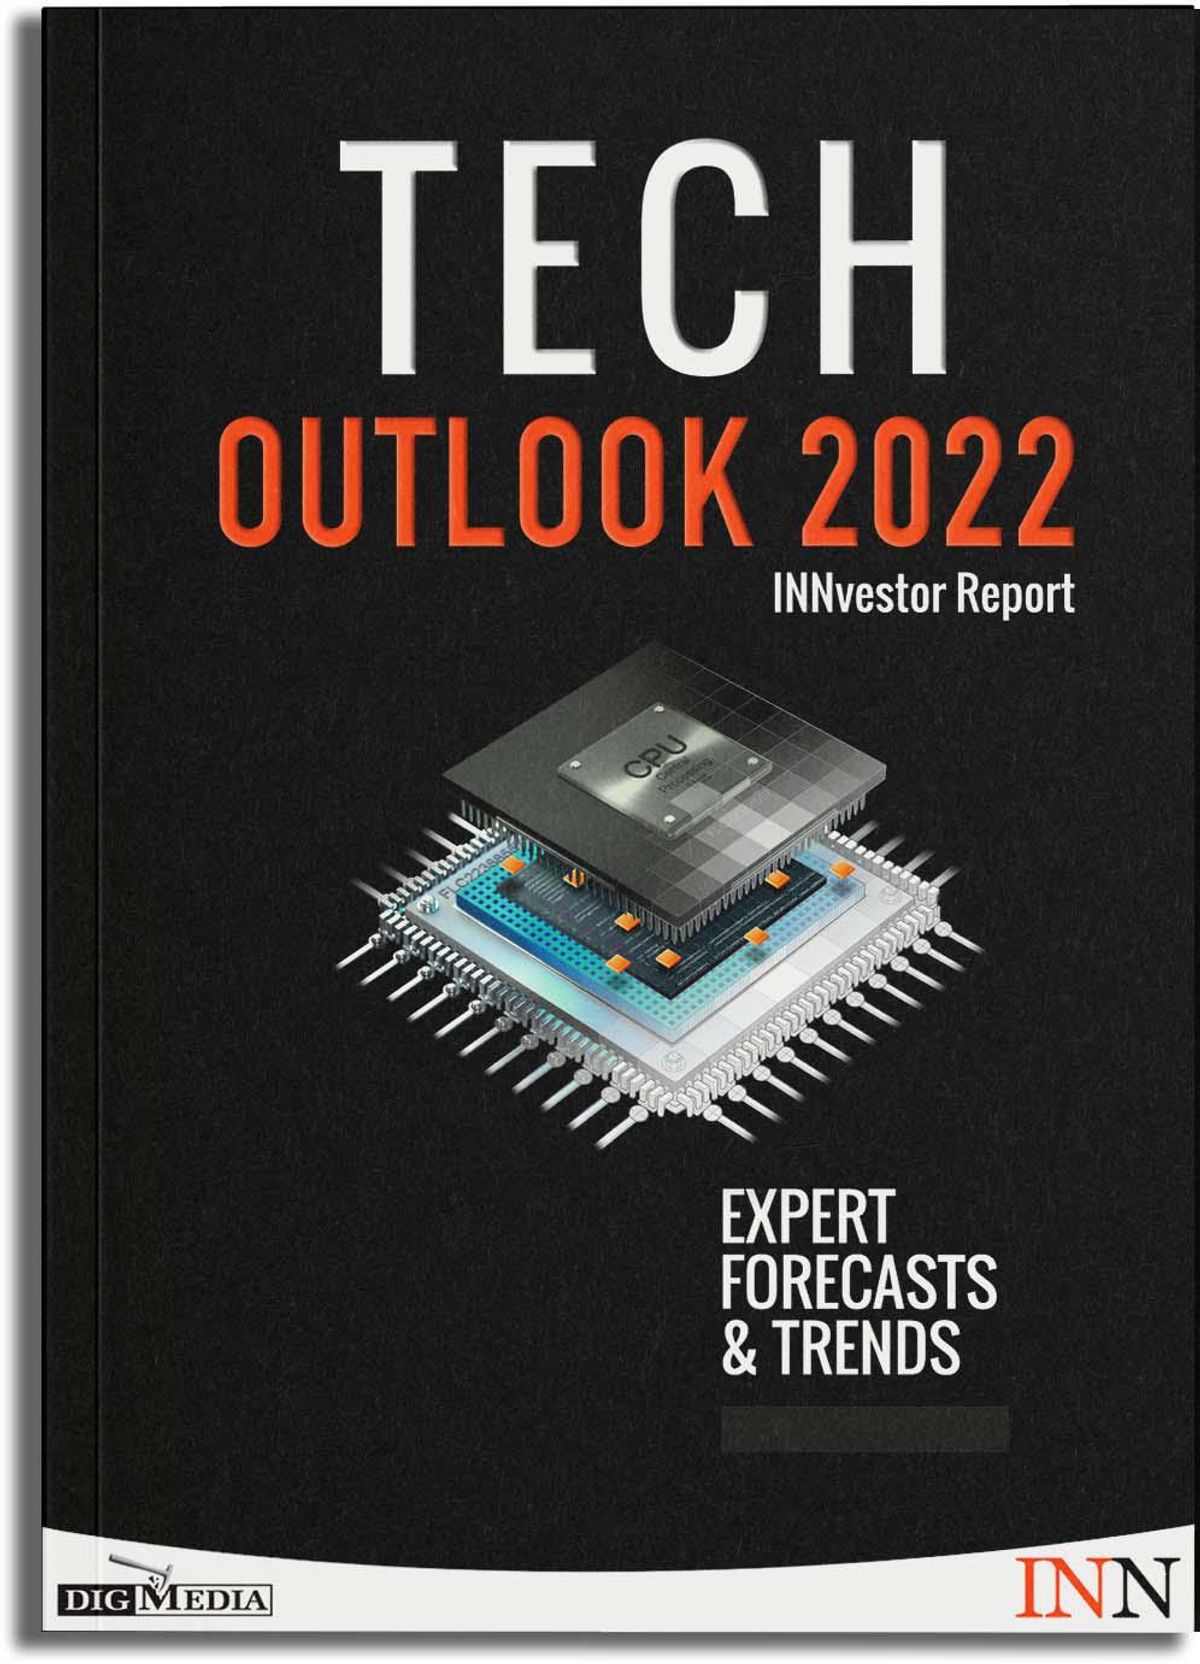 NEW! Download Our FREE 2022 Tech Outlook Report